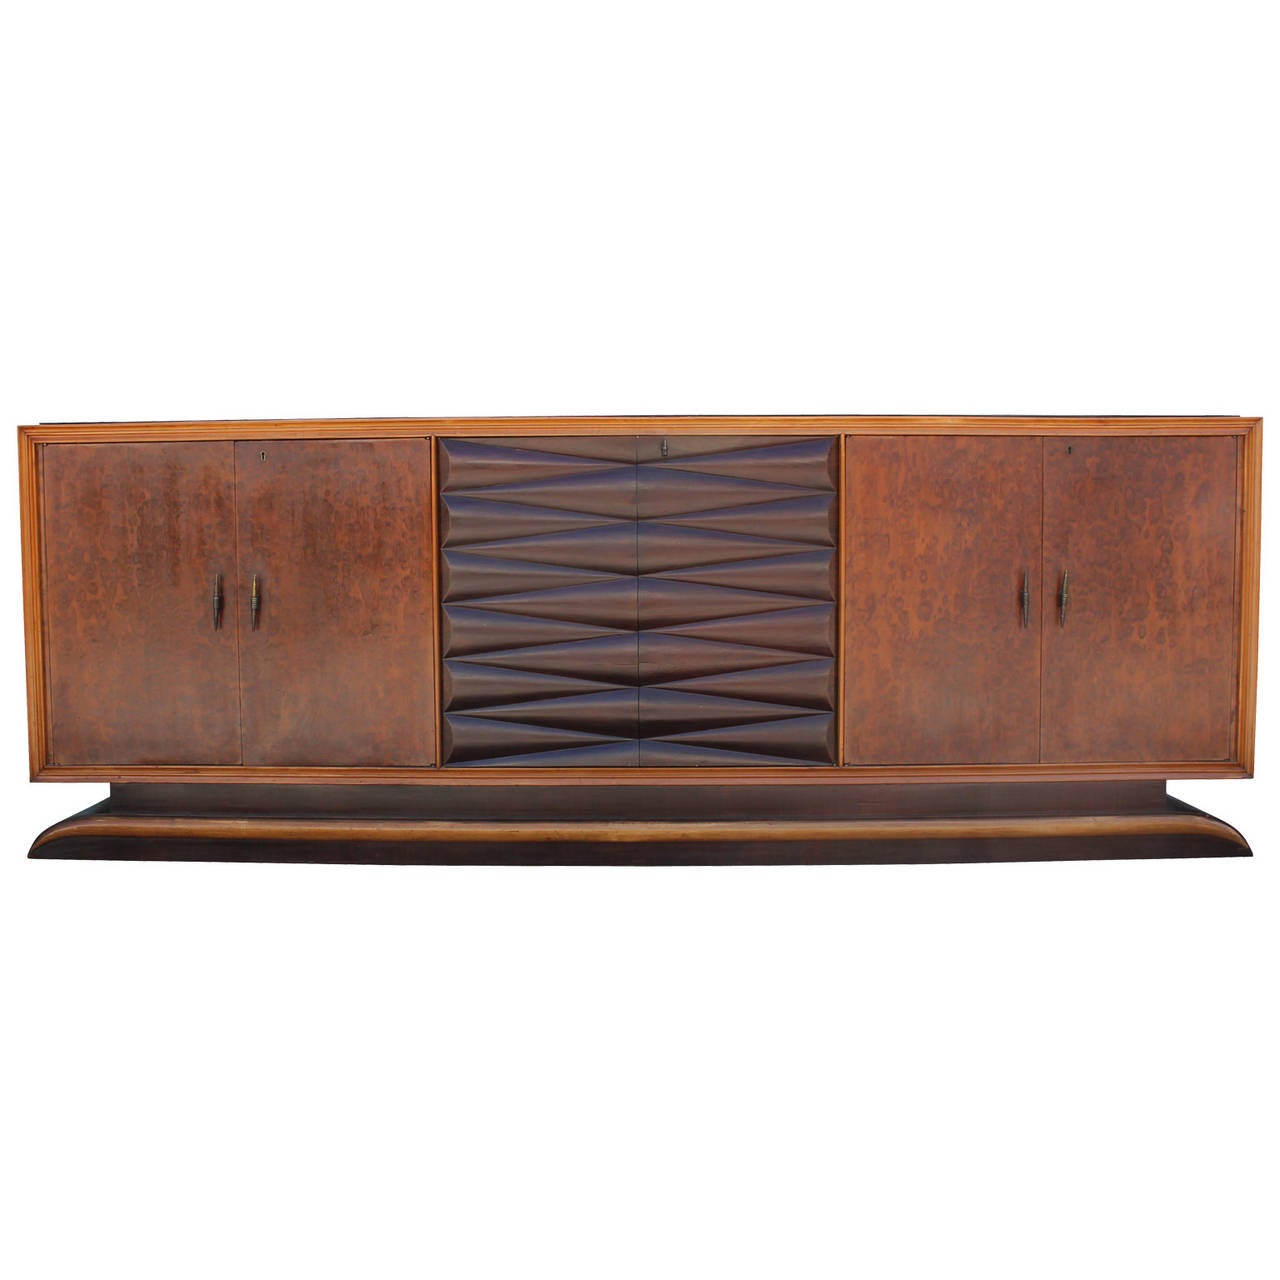 Glamorous deco style Italian sideboard from the 1930s-1940s. Sideboard has a beautiful attention to detail with quilted doors. Right and left cabinet doors are in burl wood, while the center cabinet doors are intricately carved. Right cabinet doors